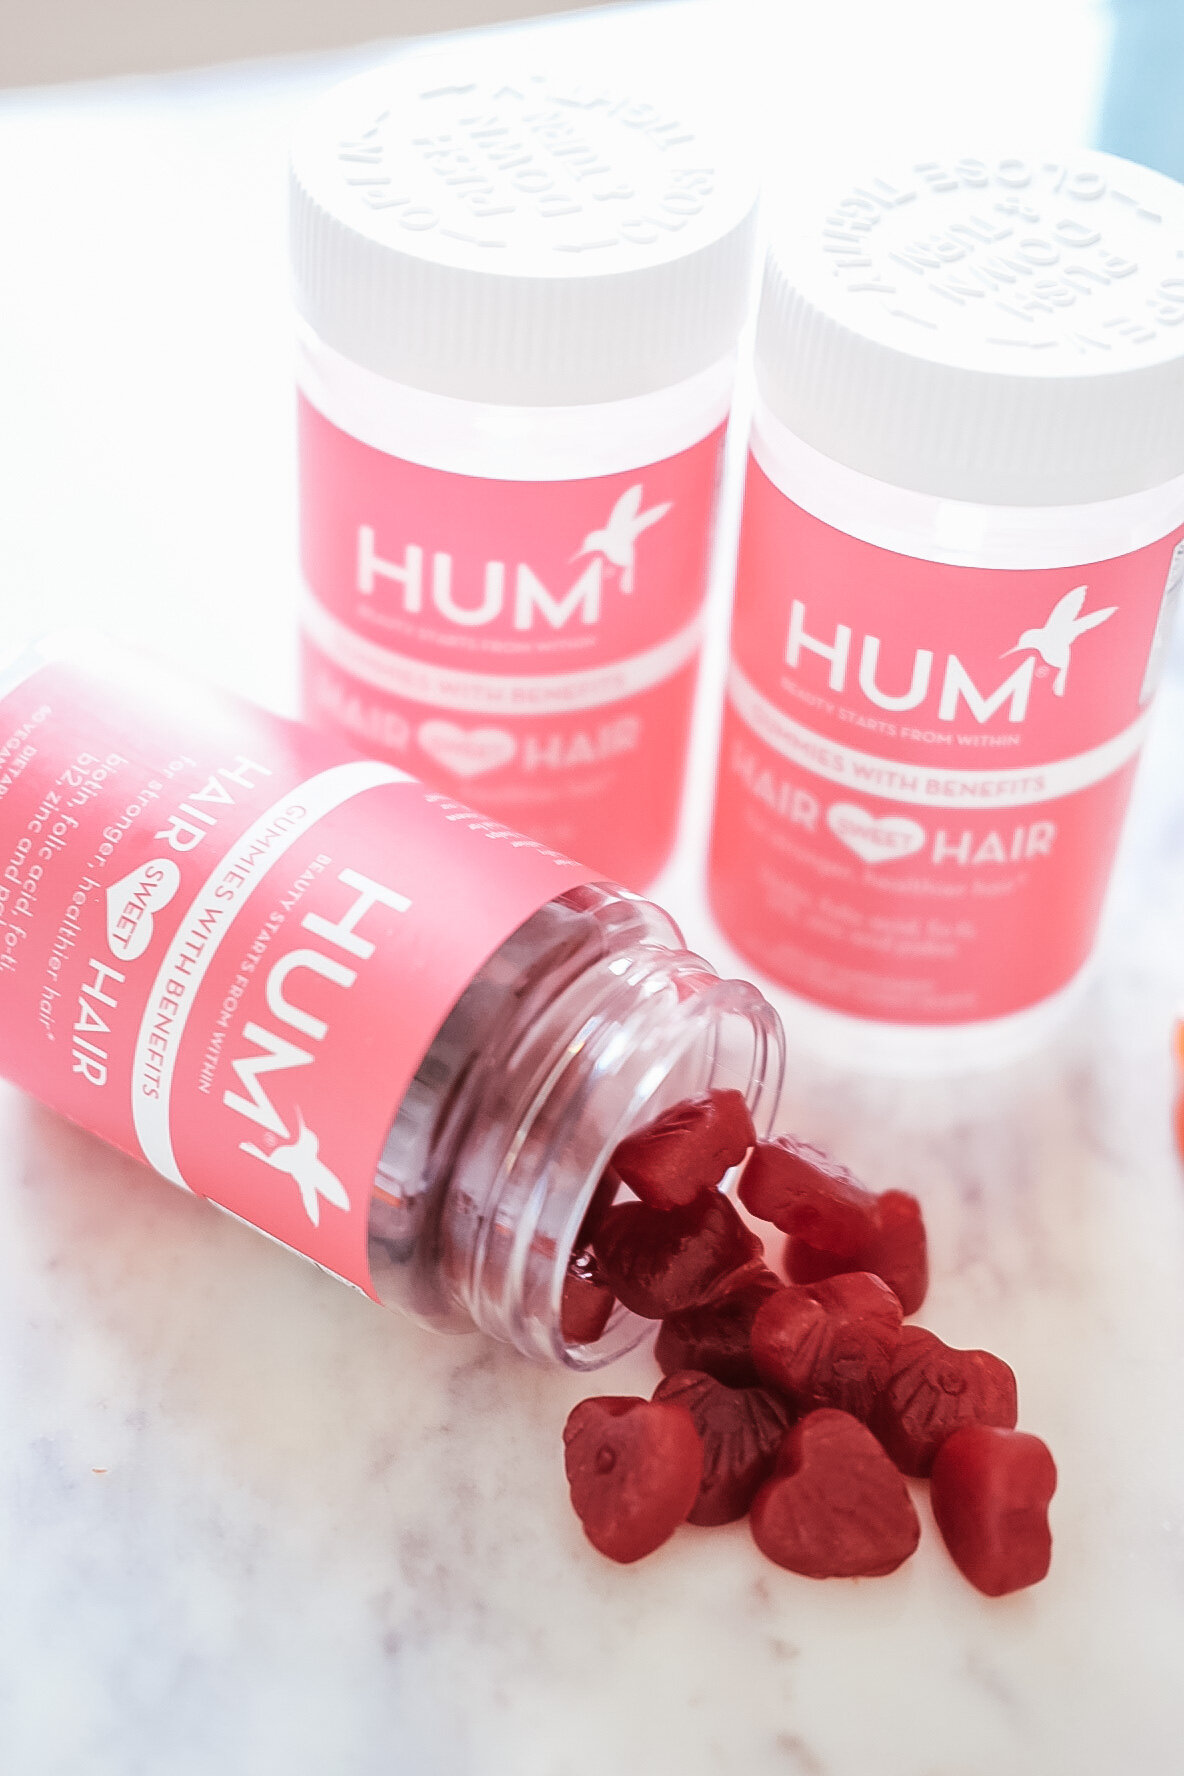 Hum Nutrition Review - Hair, Skin & Cleanse vitamins and supplements